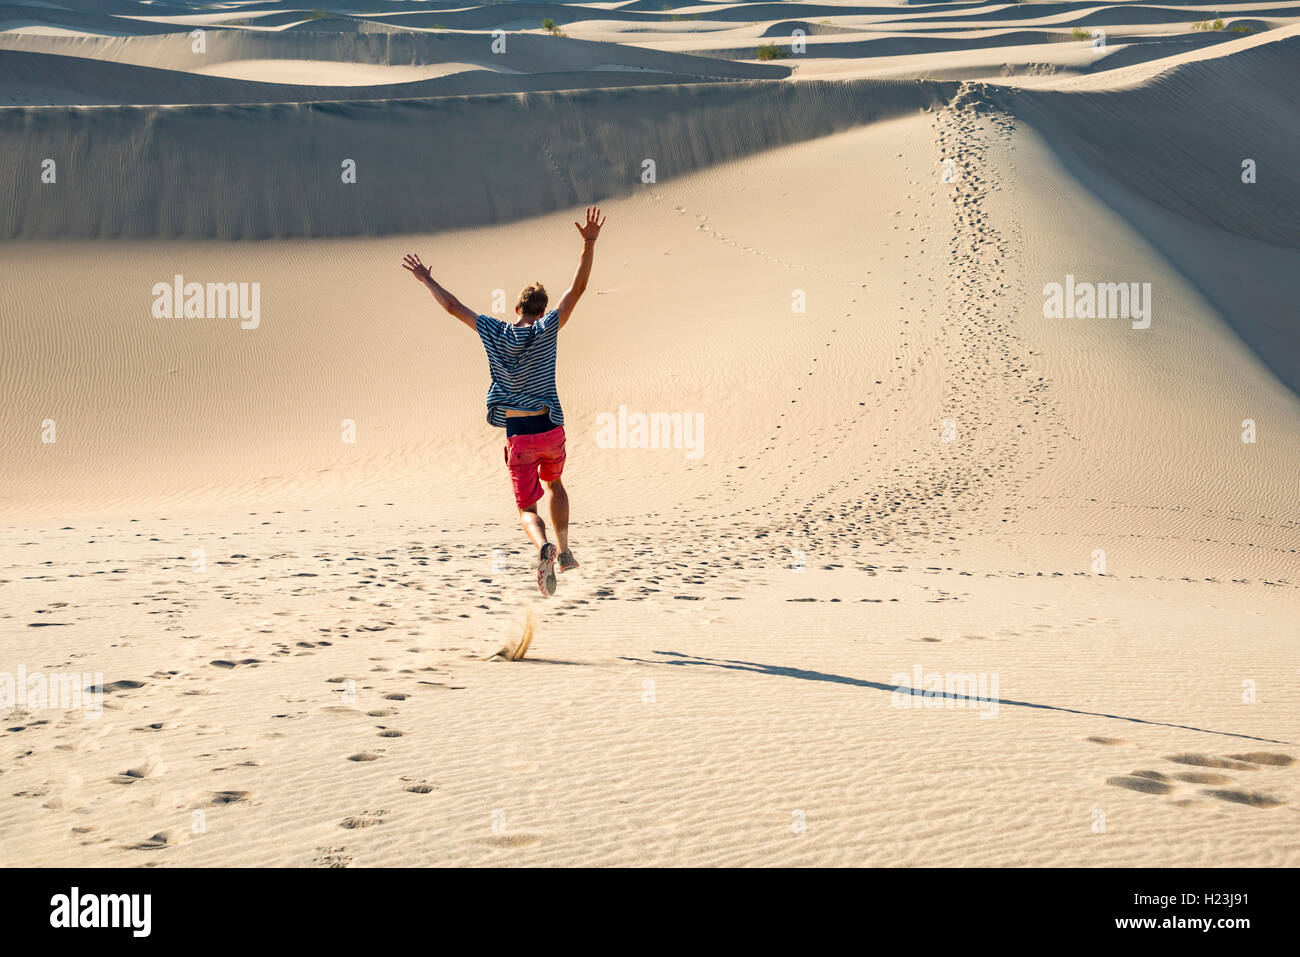 Young man, tourist running down sand dune, Mesquite Flat Sand Dunes, Death Valley, Death Valley National Park, California, USA Stock Photo